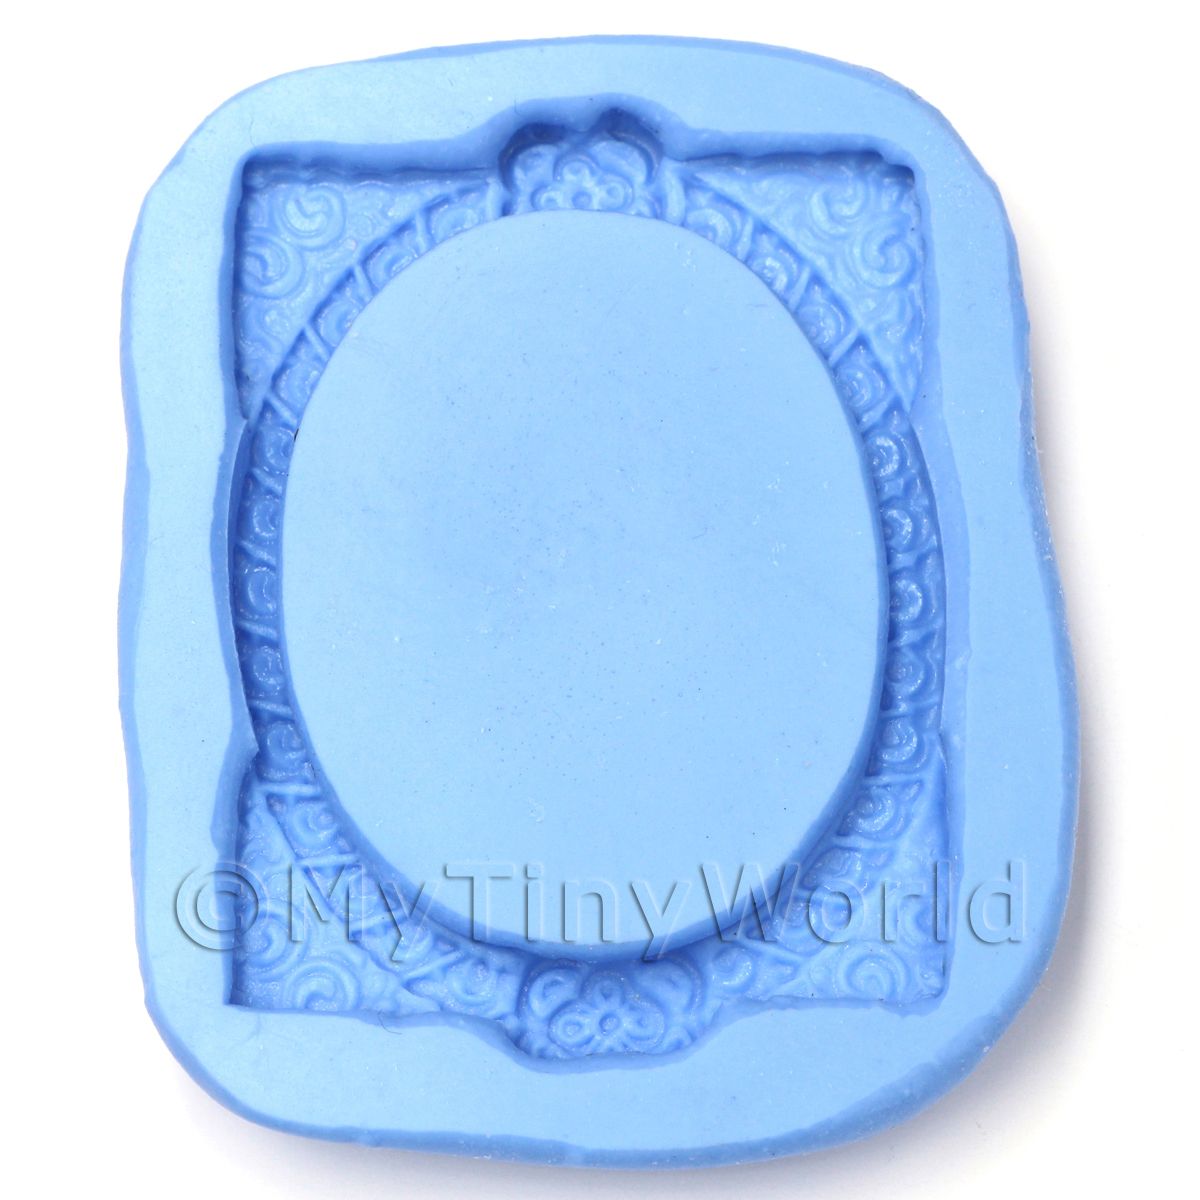 Dolls House Miniature Reusable Ornate Frame Silicone Mould